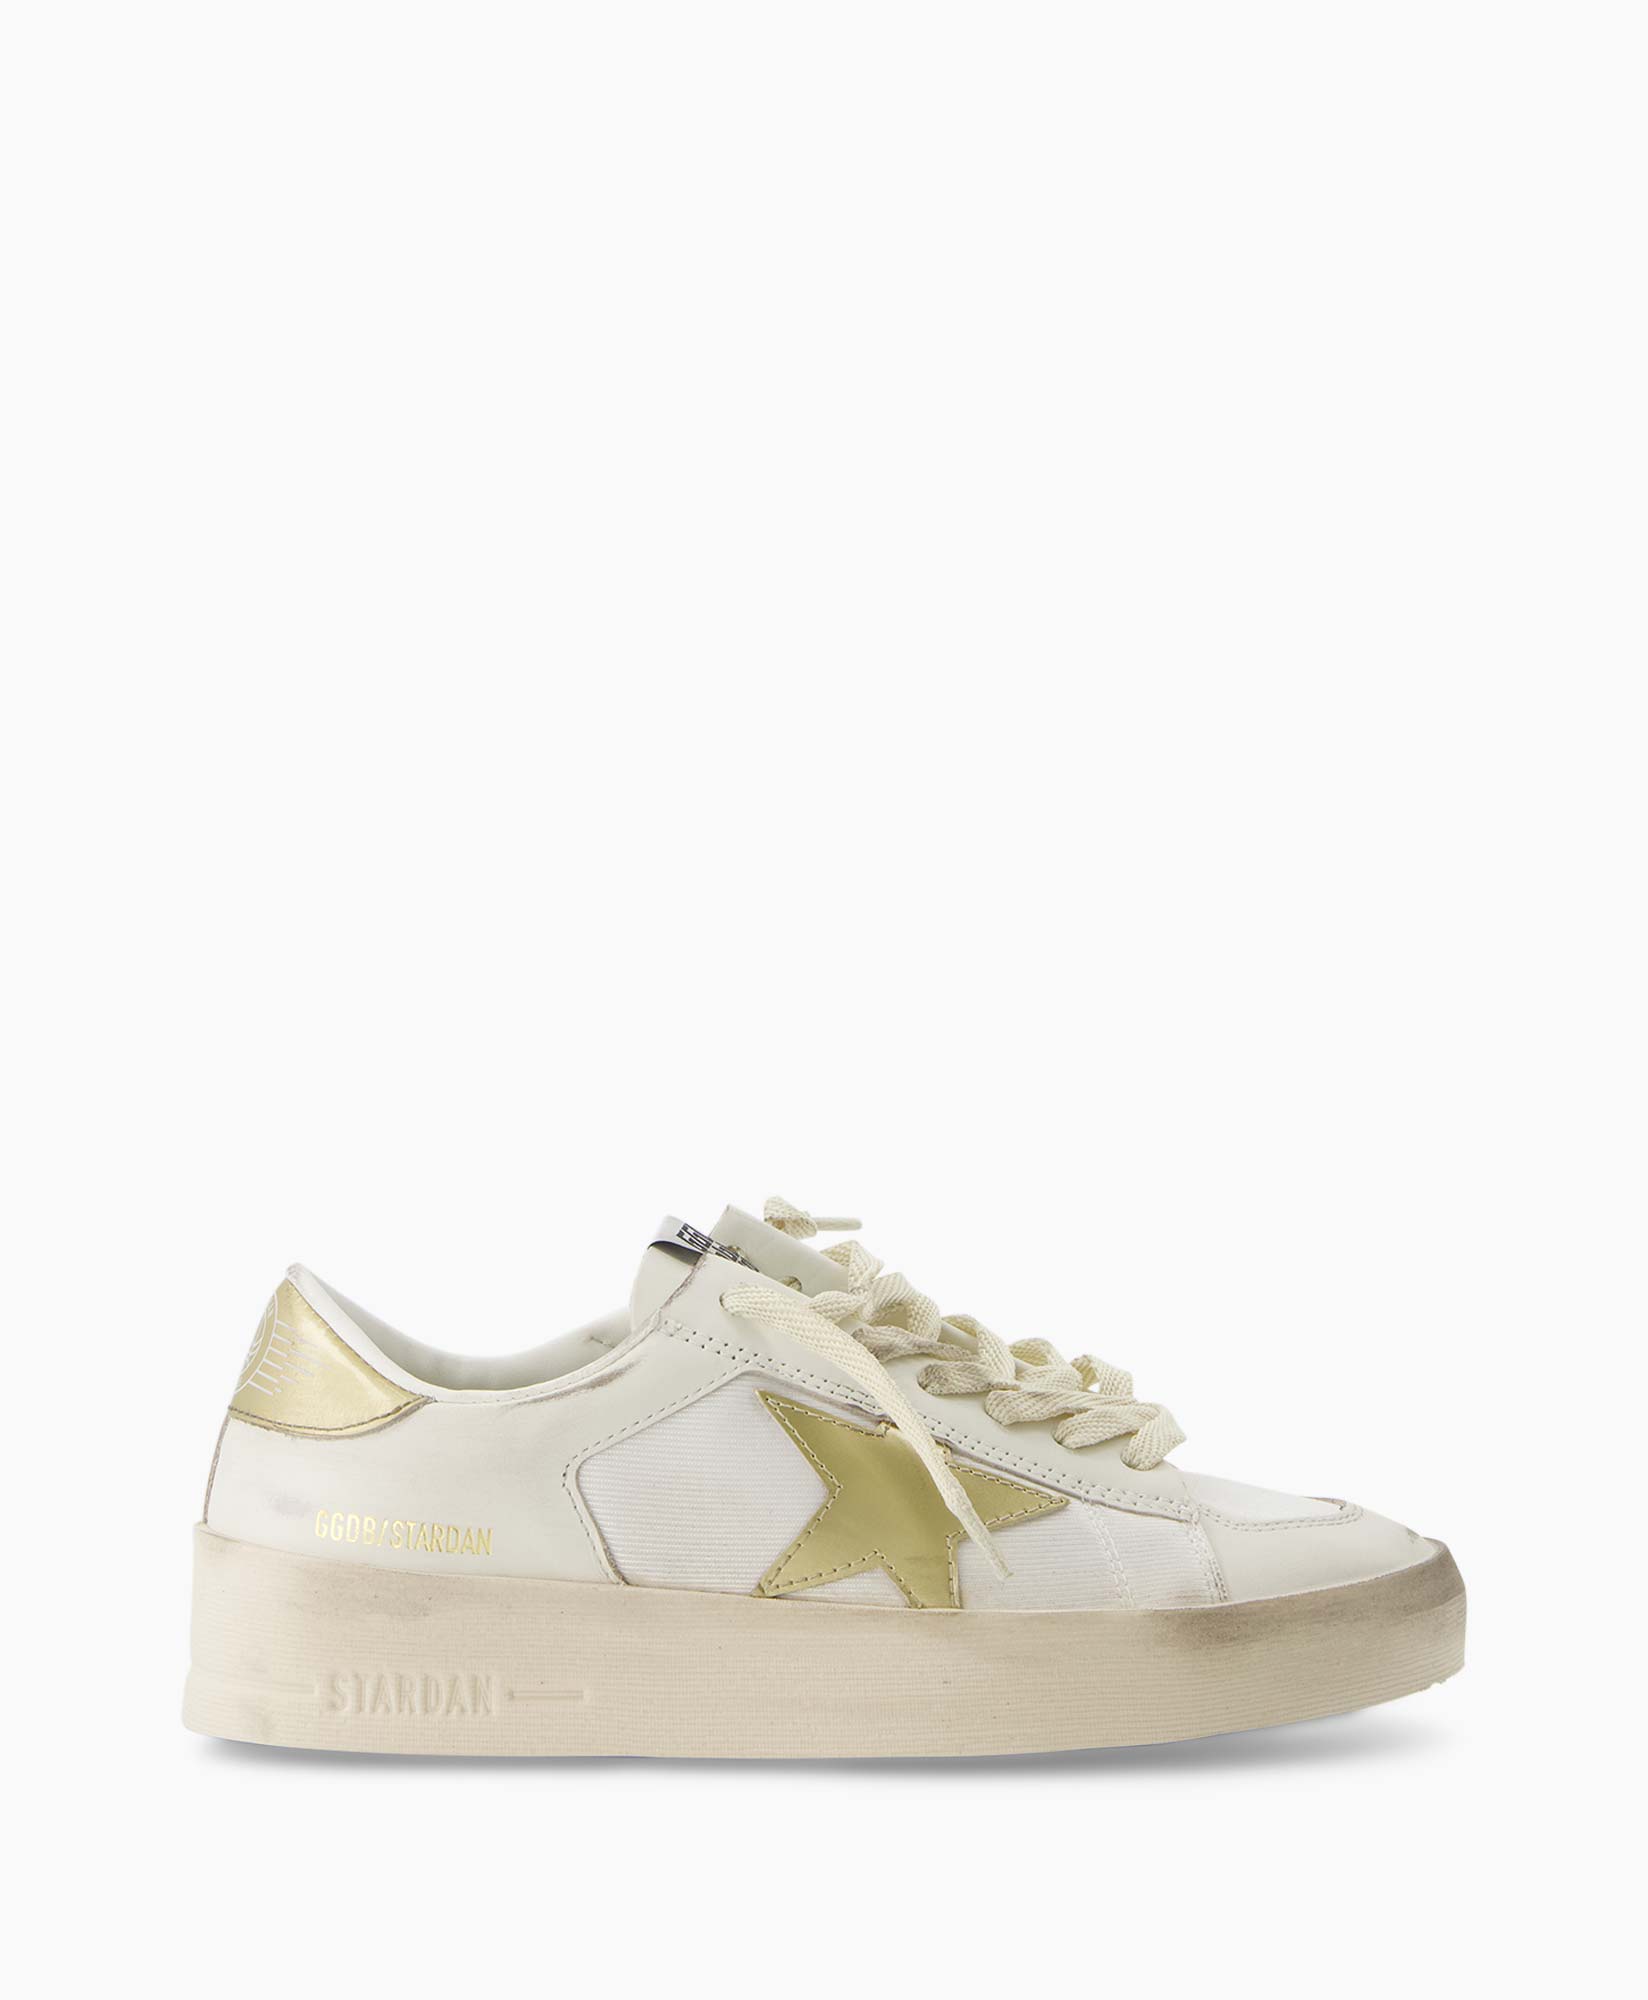 Golden Goose Sneaker Stardan Leather Mirrored Leat Wit